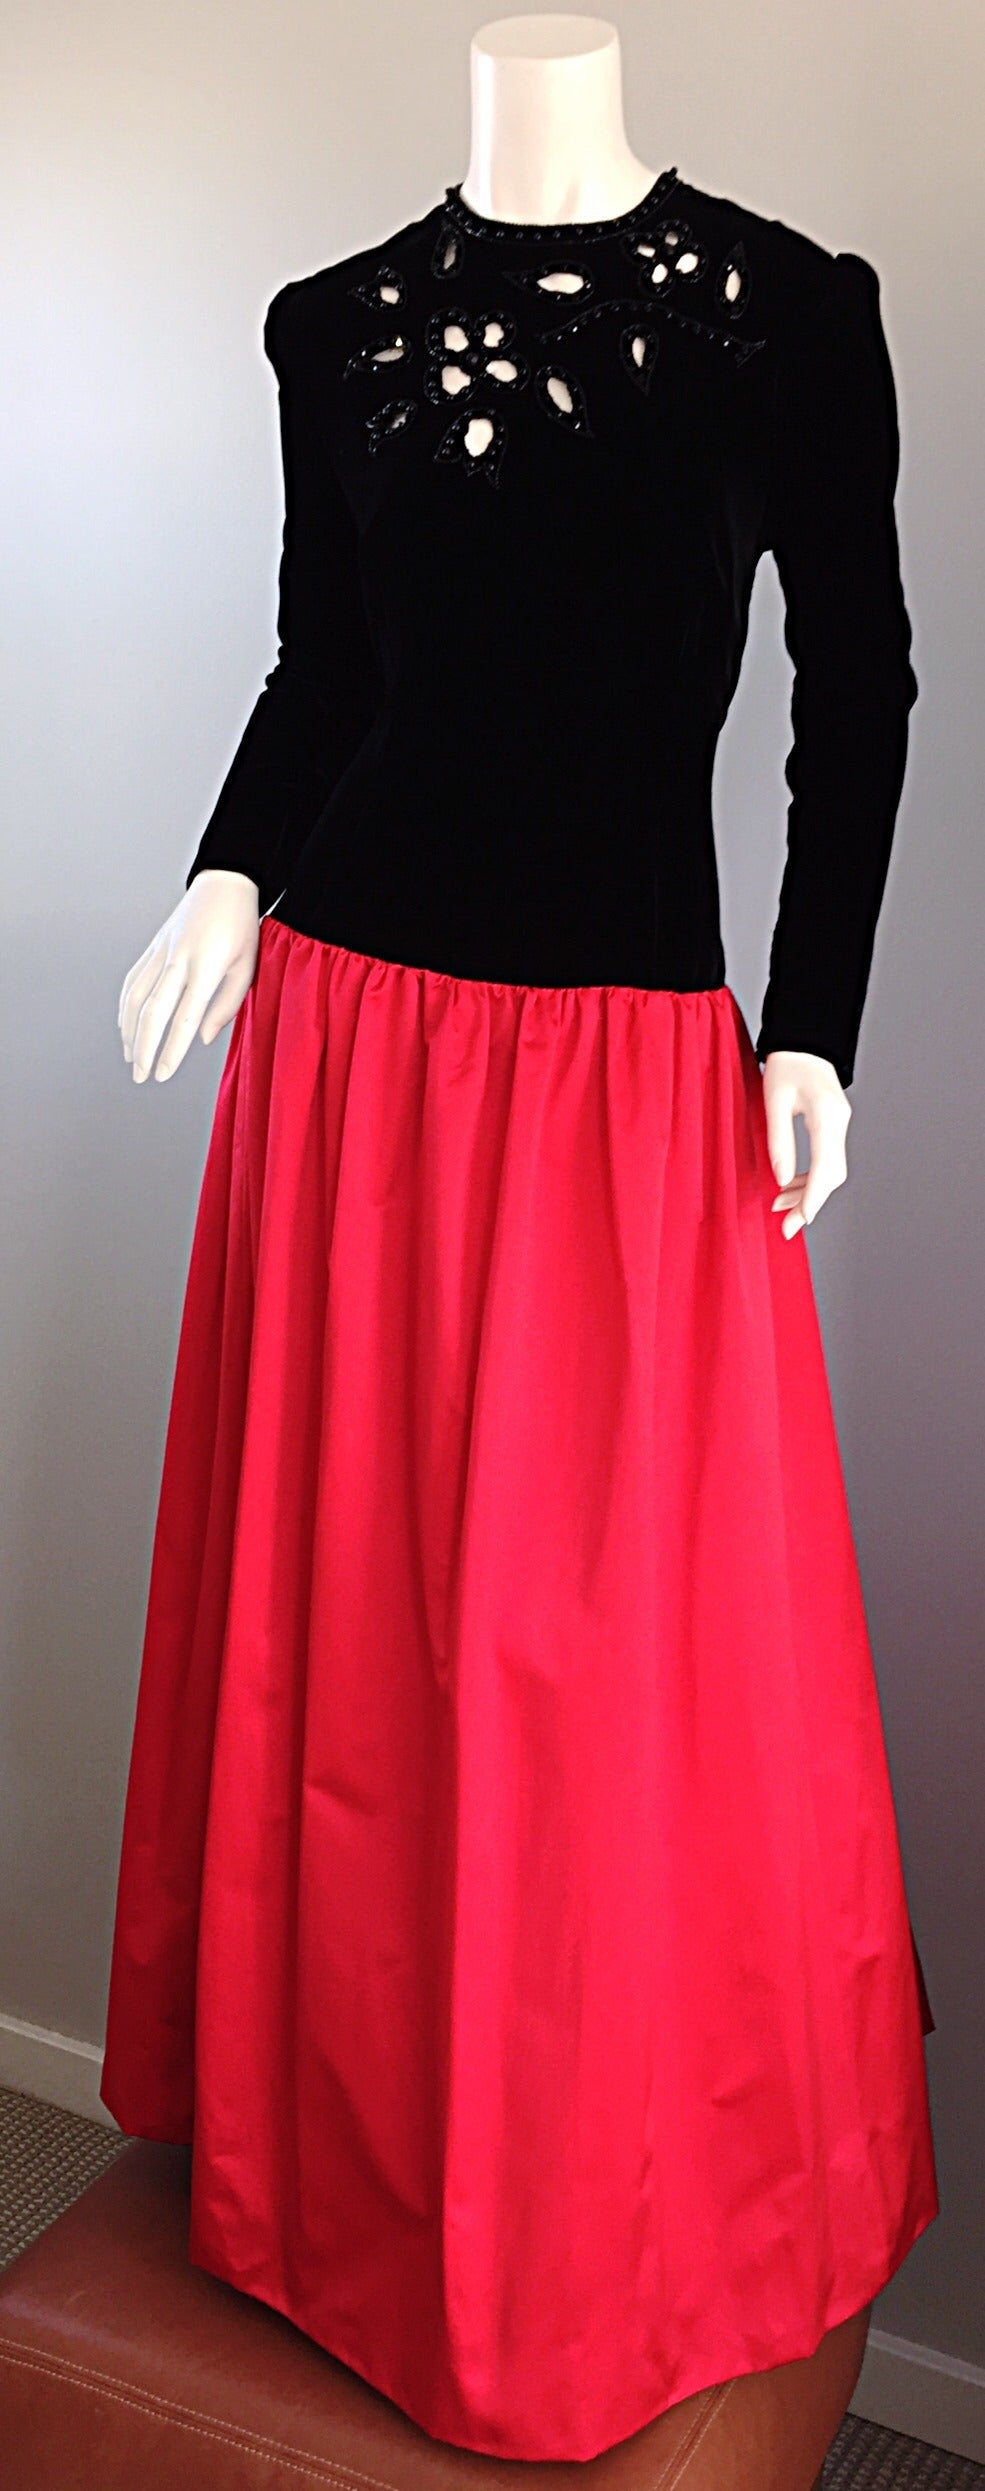 Absolutely stunning vintage Givenchy gown! Black silk velvet bodice, with cut-out detail, encrusted with black beads. Long silk taffeta full skirt in vibrant red. Sleek long sleeves. Slight drop waist is extremely flattering! Perfect gown,